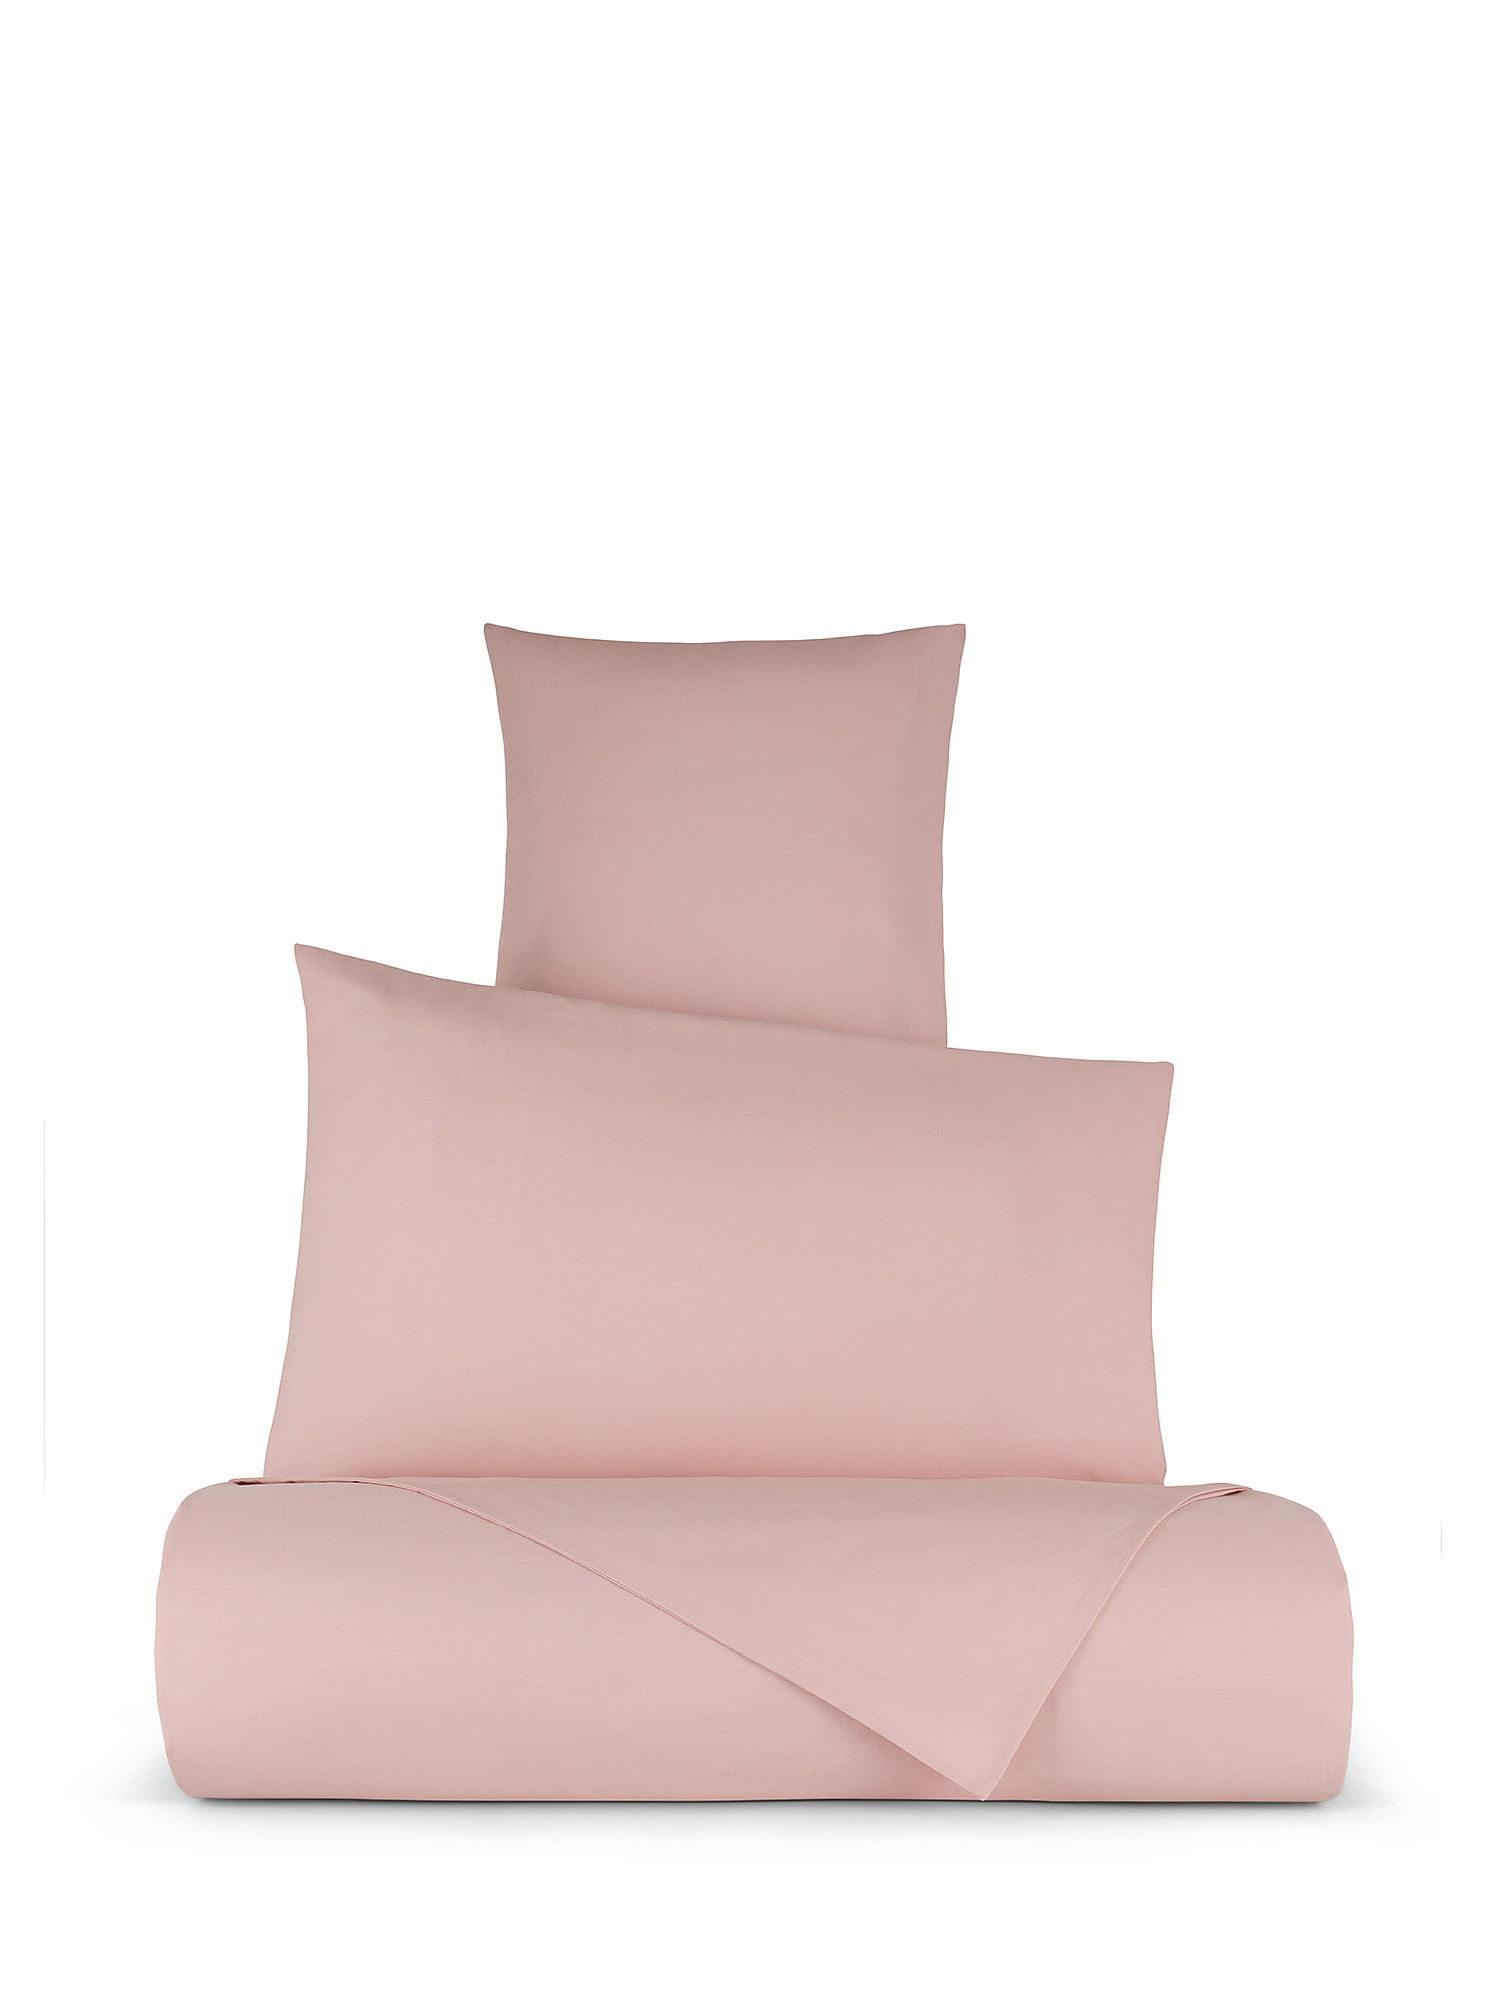 Solid color percale cotton duvet cover set, Pink, large image number 0